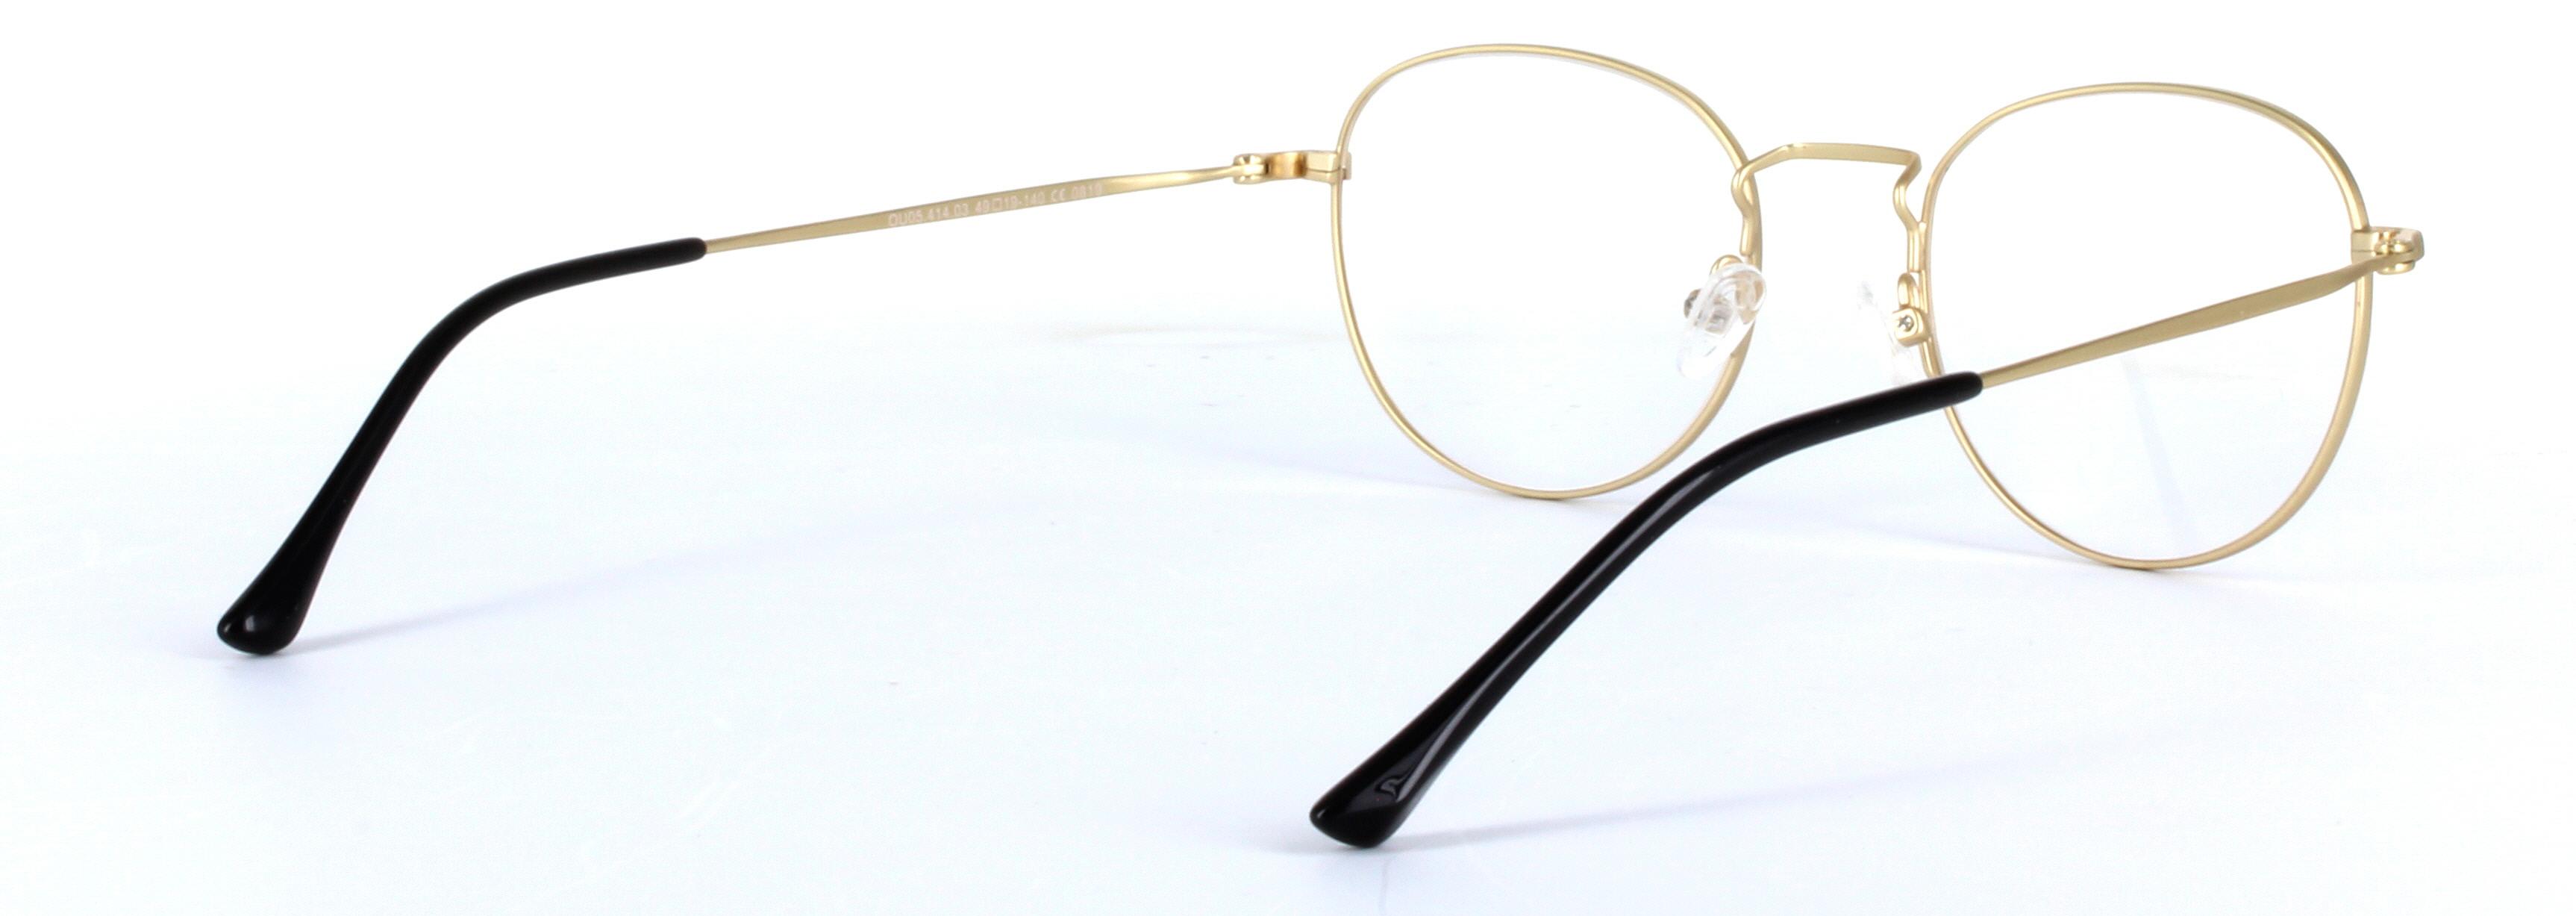 Milan Red and Gold Full Rim Round Metal Glasses - Image View 4